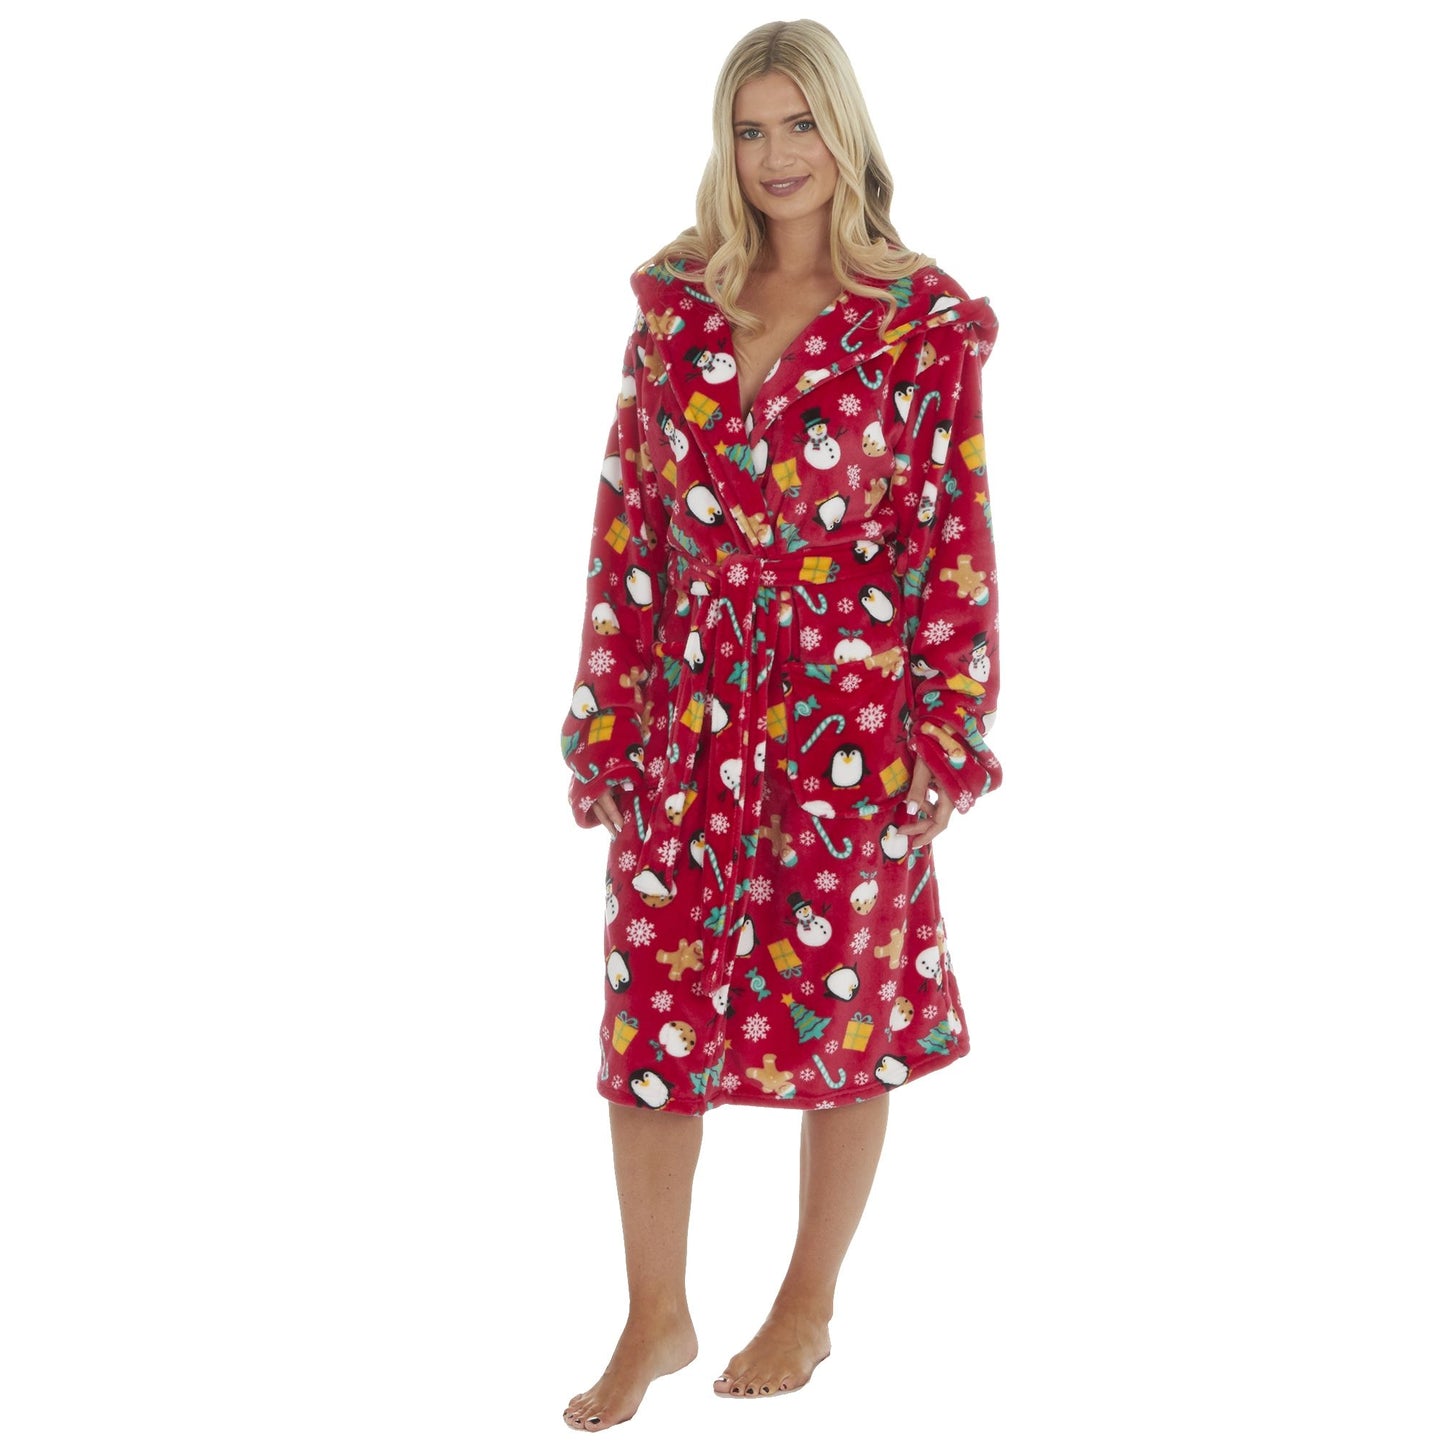 Unisex Adults Christmas Print Dressing Gown ~ S-XL